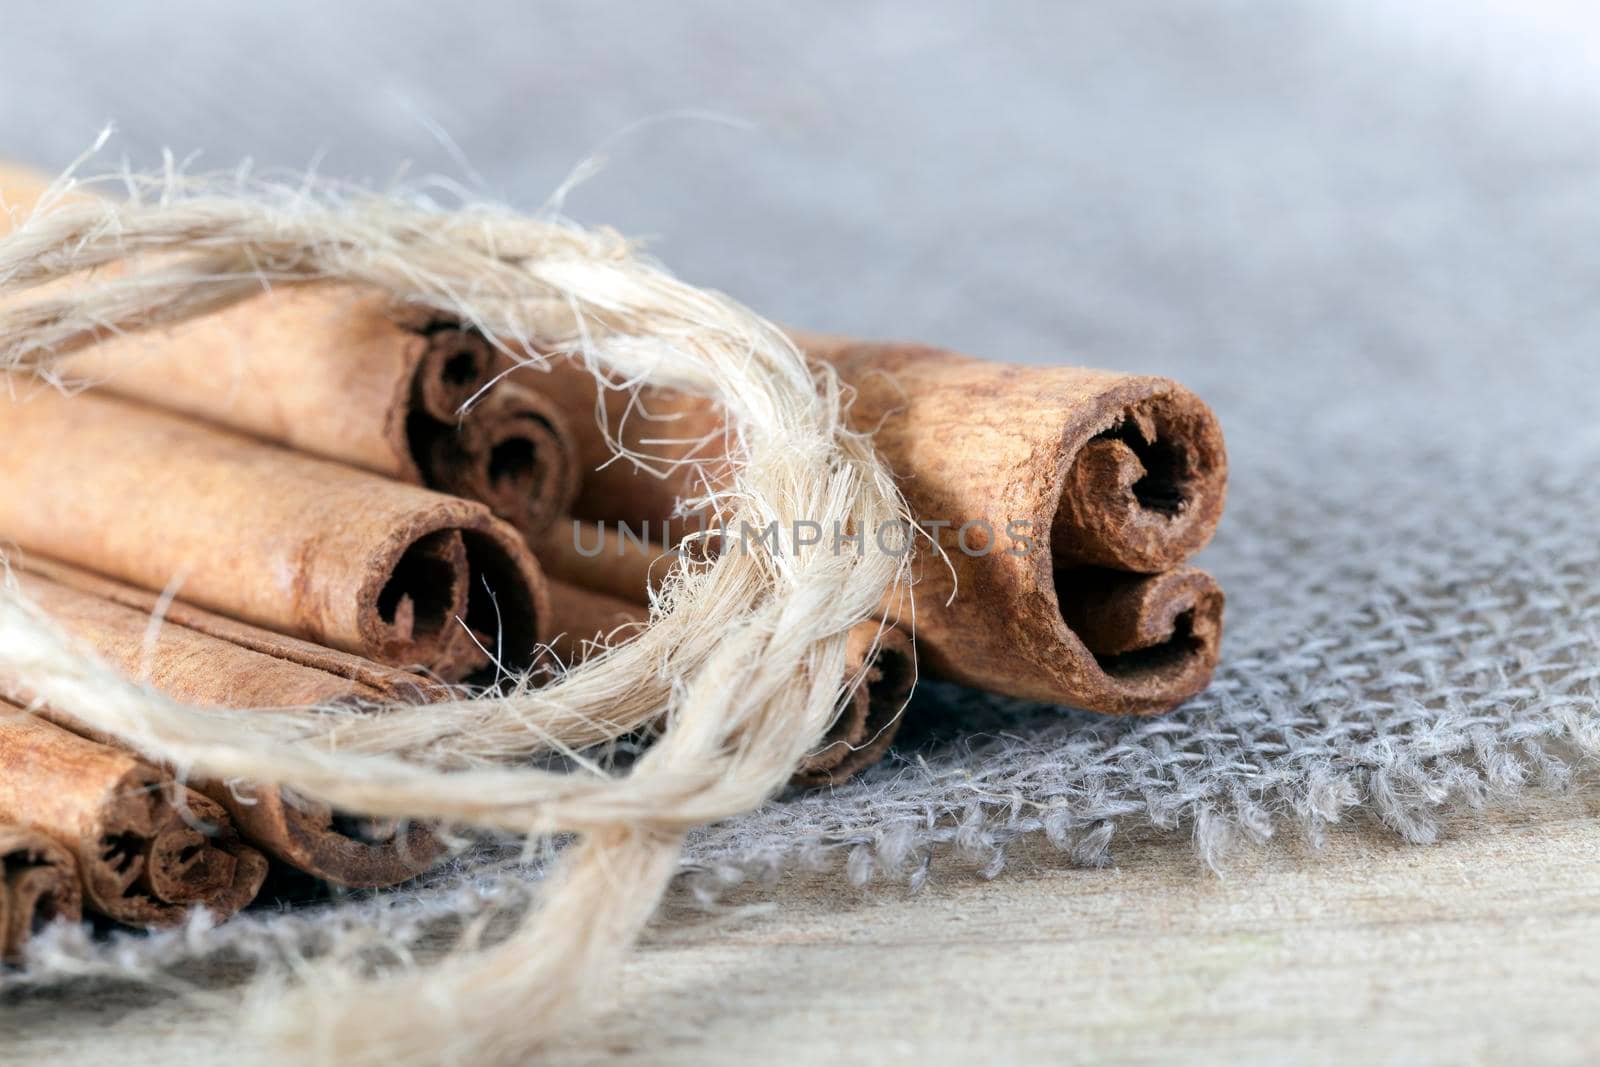 whole solid cinnamon sticks tied with a rope and lying on linen material and an old wooden surface, close-up on the side